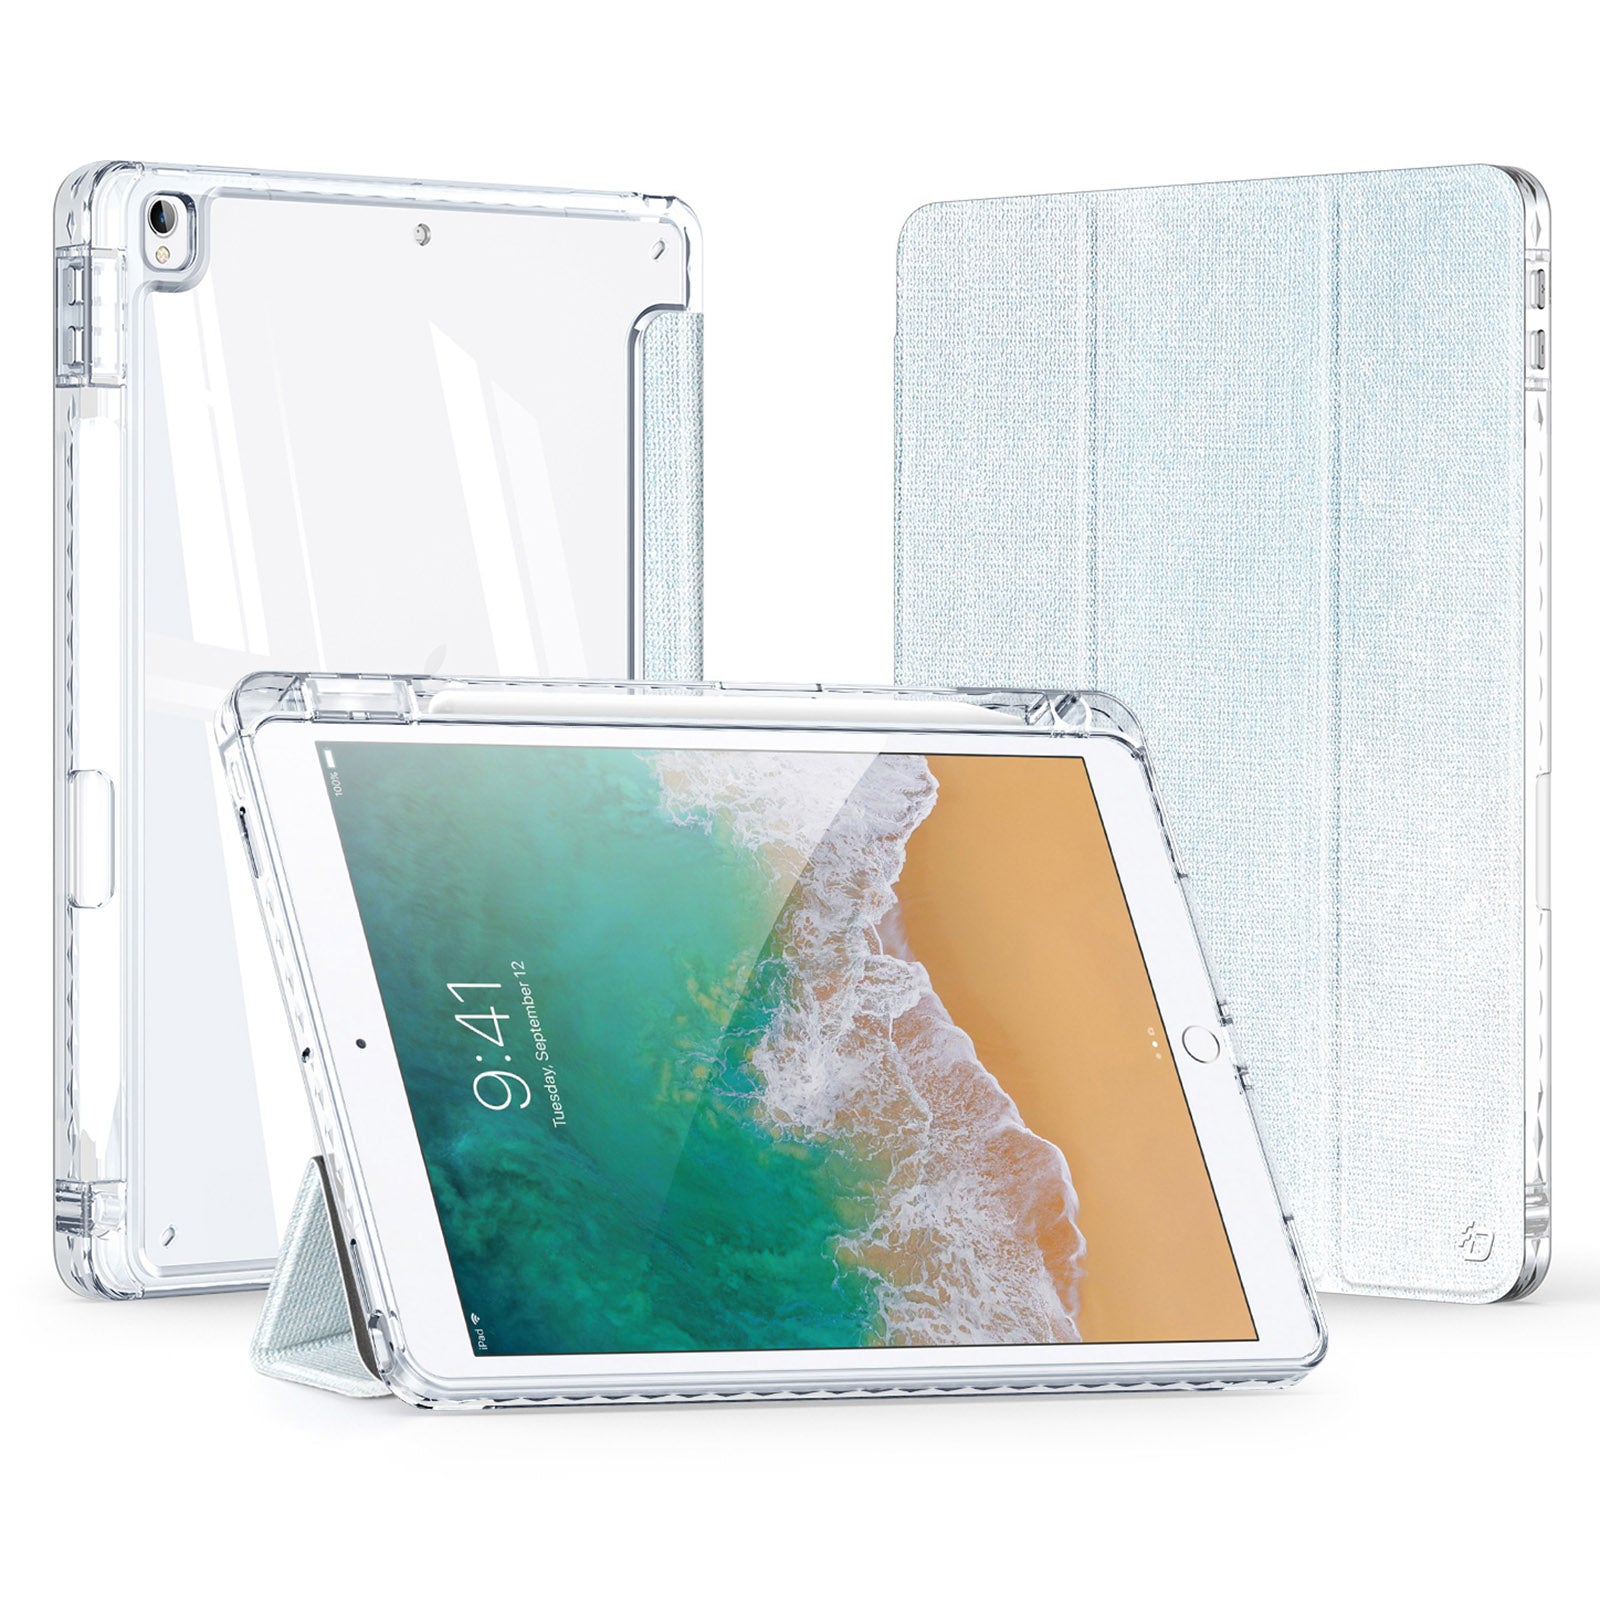 DUX DUCIS Unid Series For iPad 10.2 (2021) / (2020) / (2019) / iPad Air 10.5 inch (2019) / Pro 10.5-inch (2017) Leather Case Clear Back Cover - Baby Blue